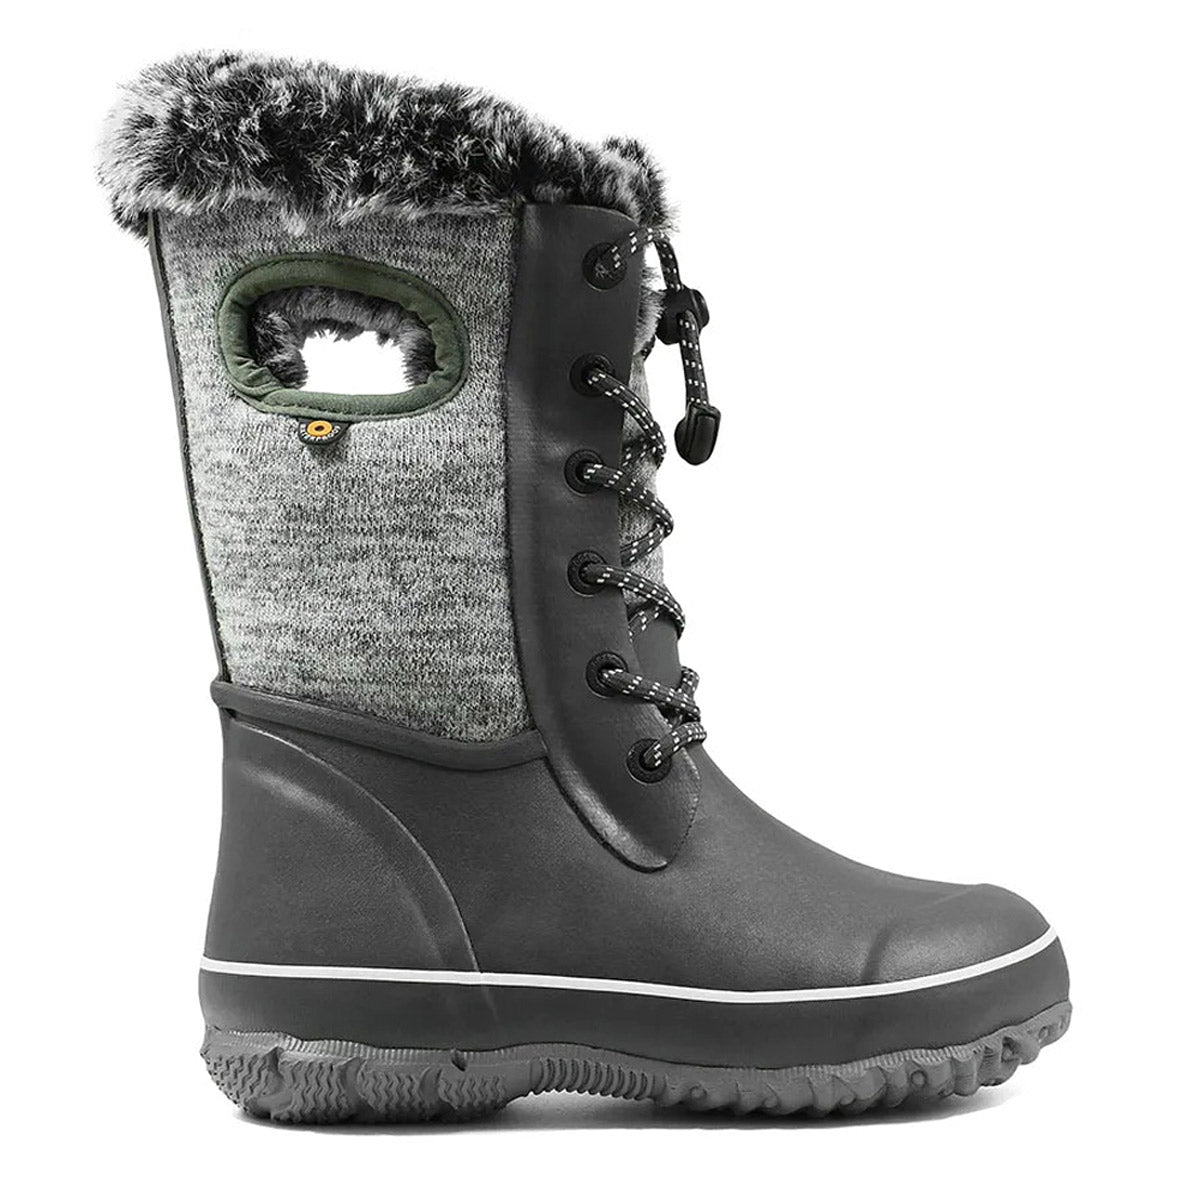 Bogs winter boot with fur lining, lace-up front, and waterproof design.